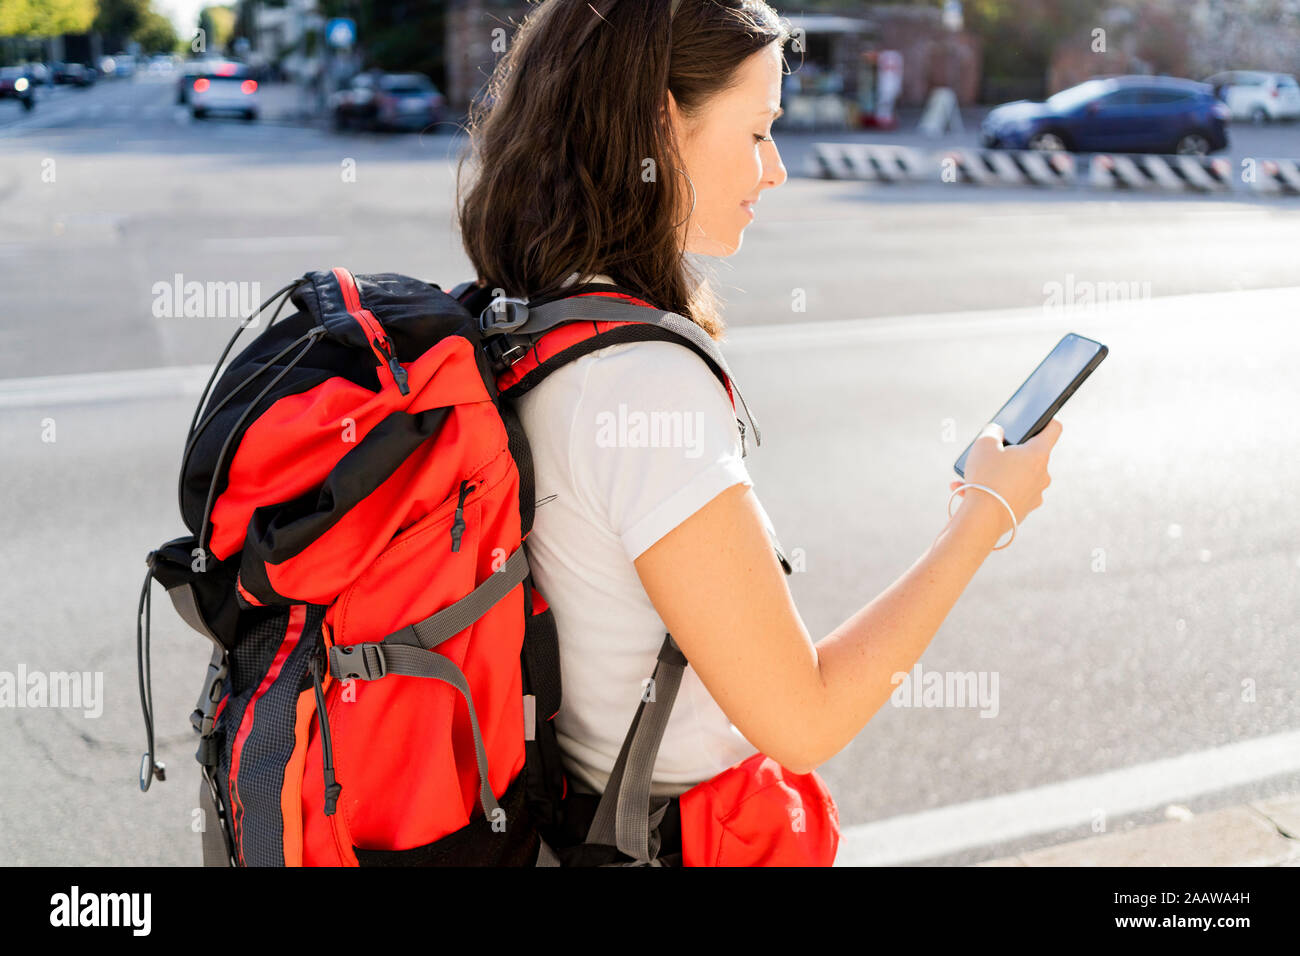 Young female backpacker with red backpack using smartphone in the city, Verona, Italy Stock Photo